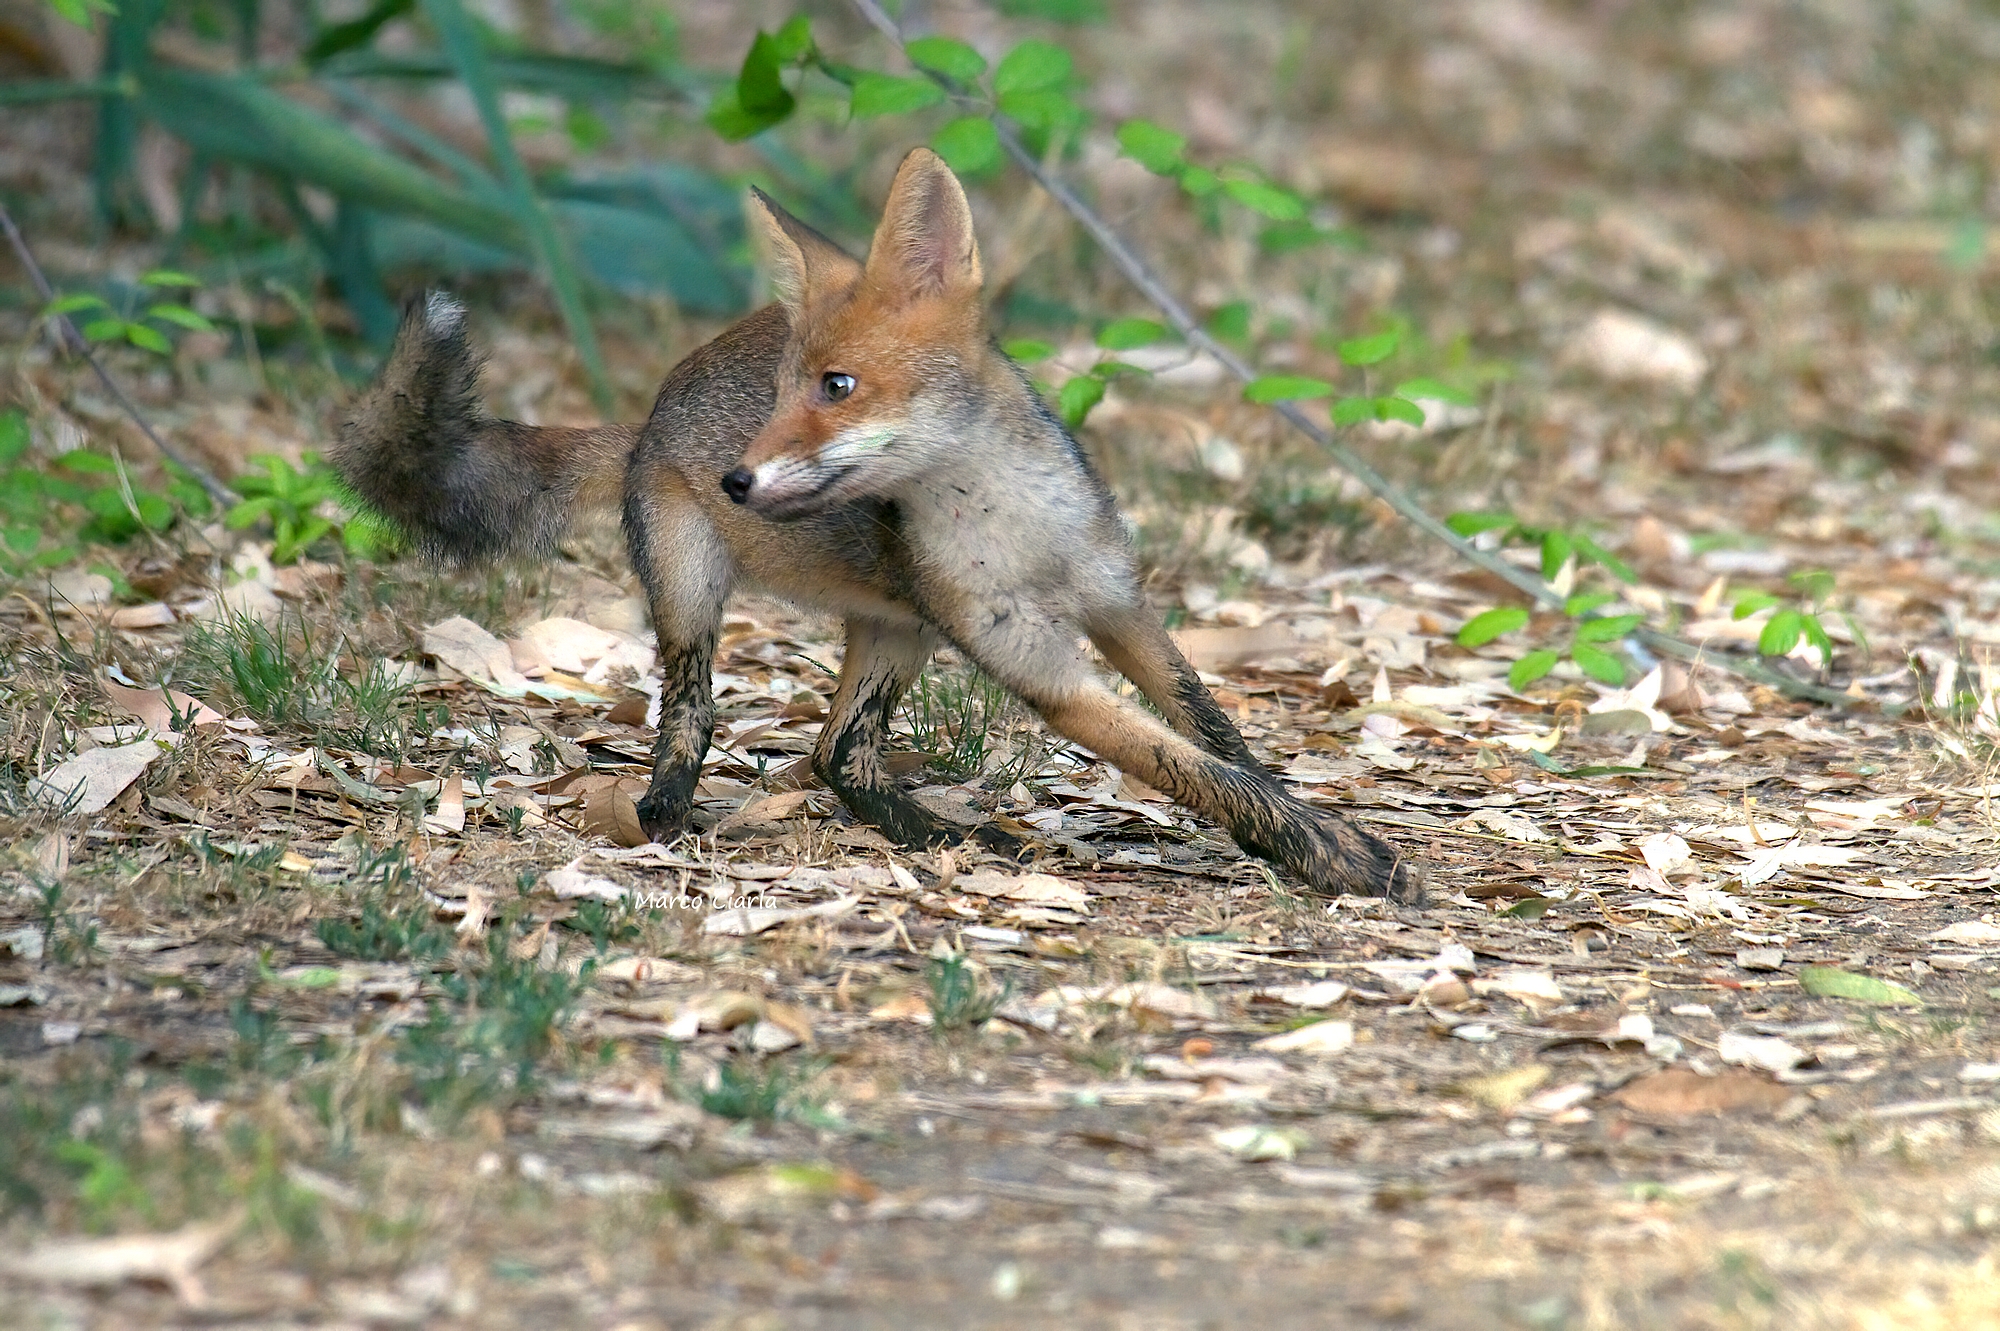 the escape of the Volpino (Vulpes vulpes) ...